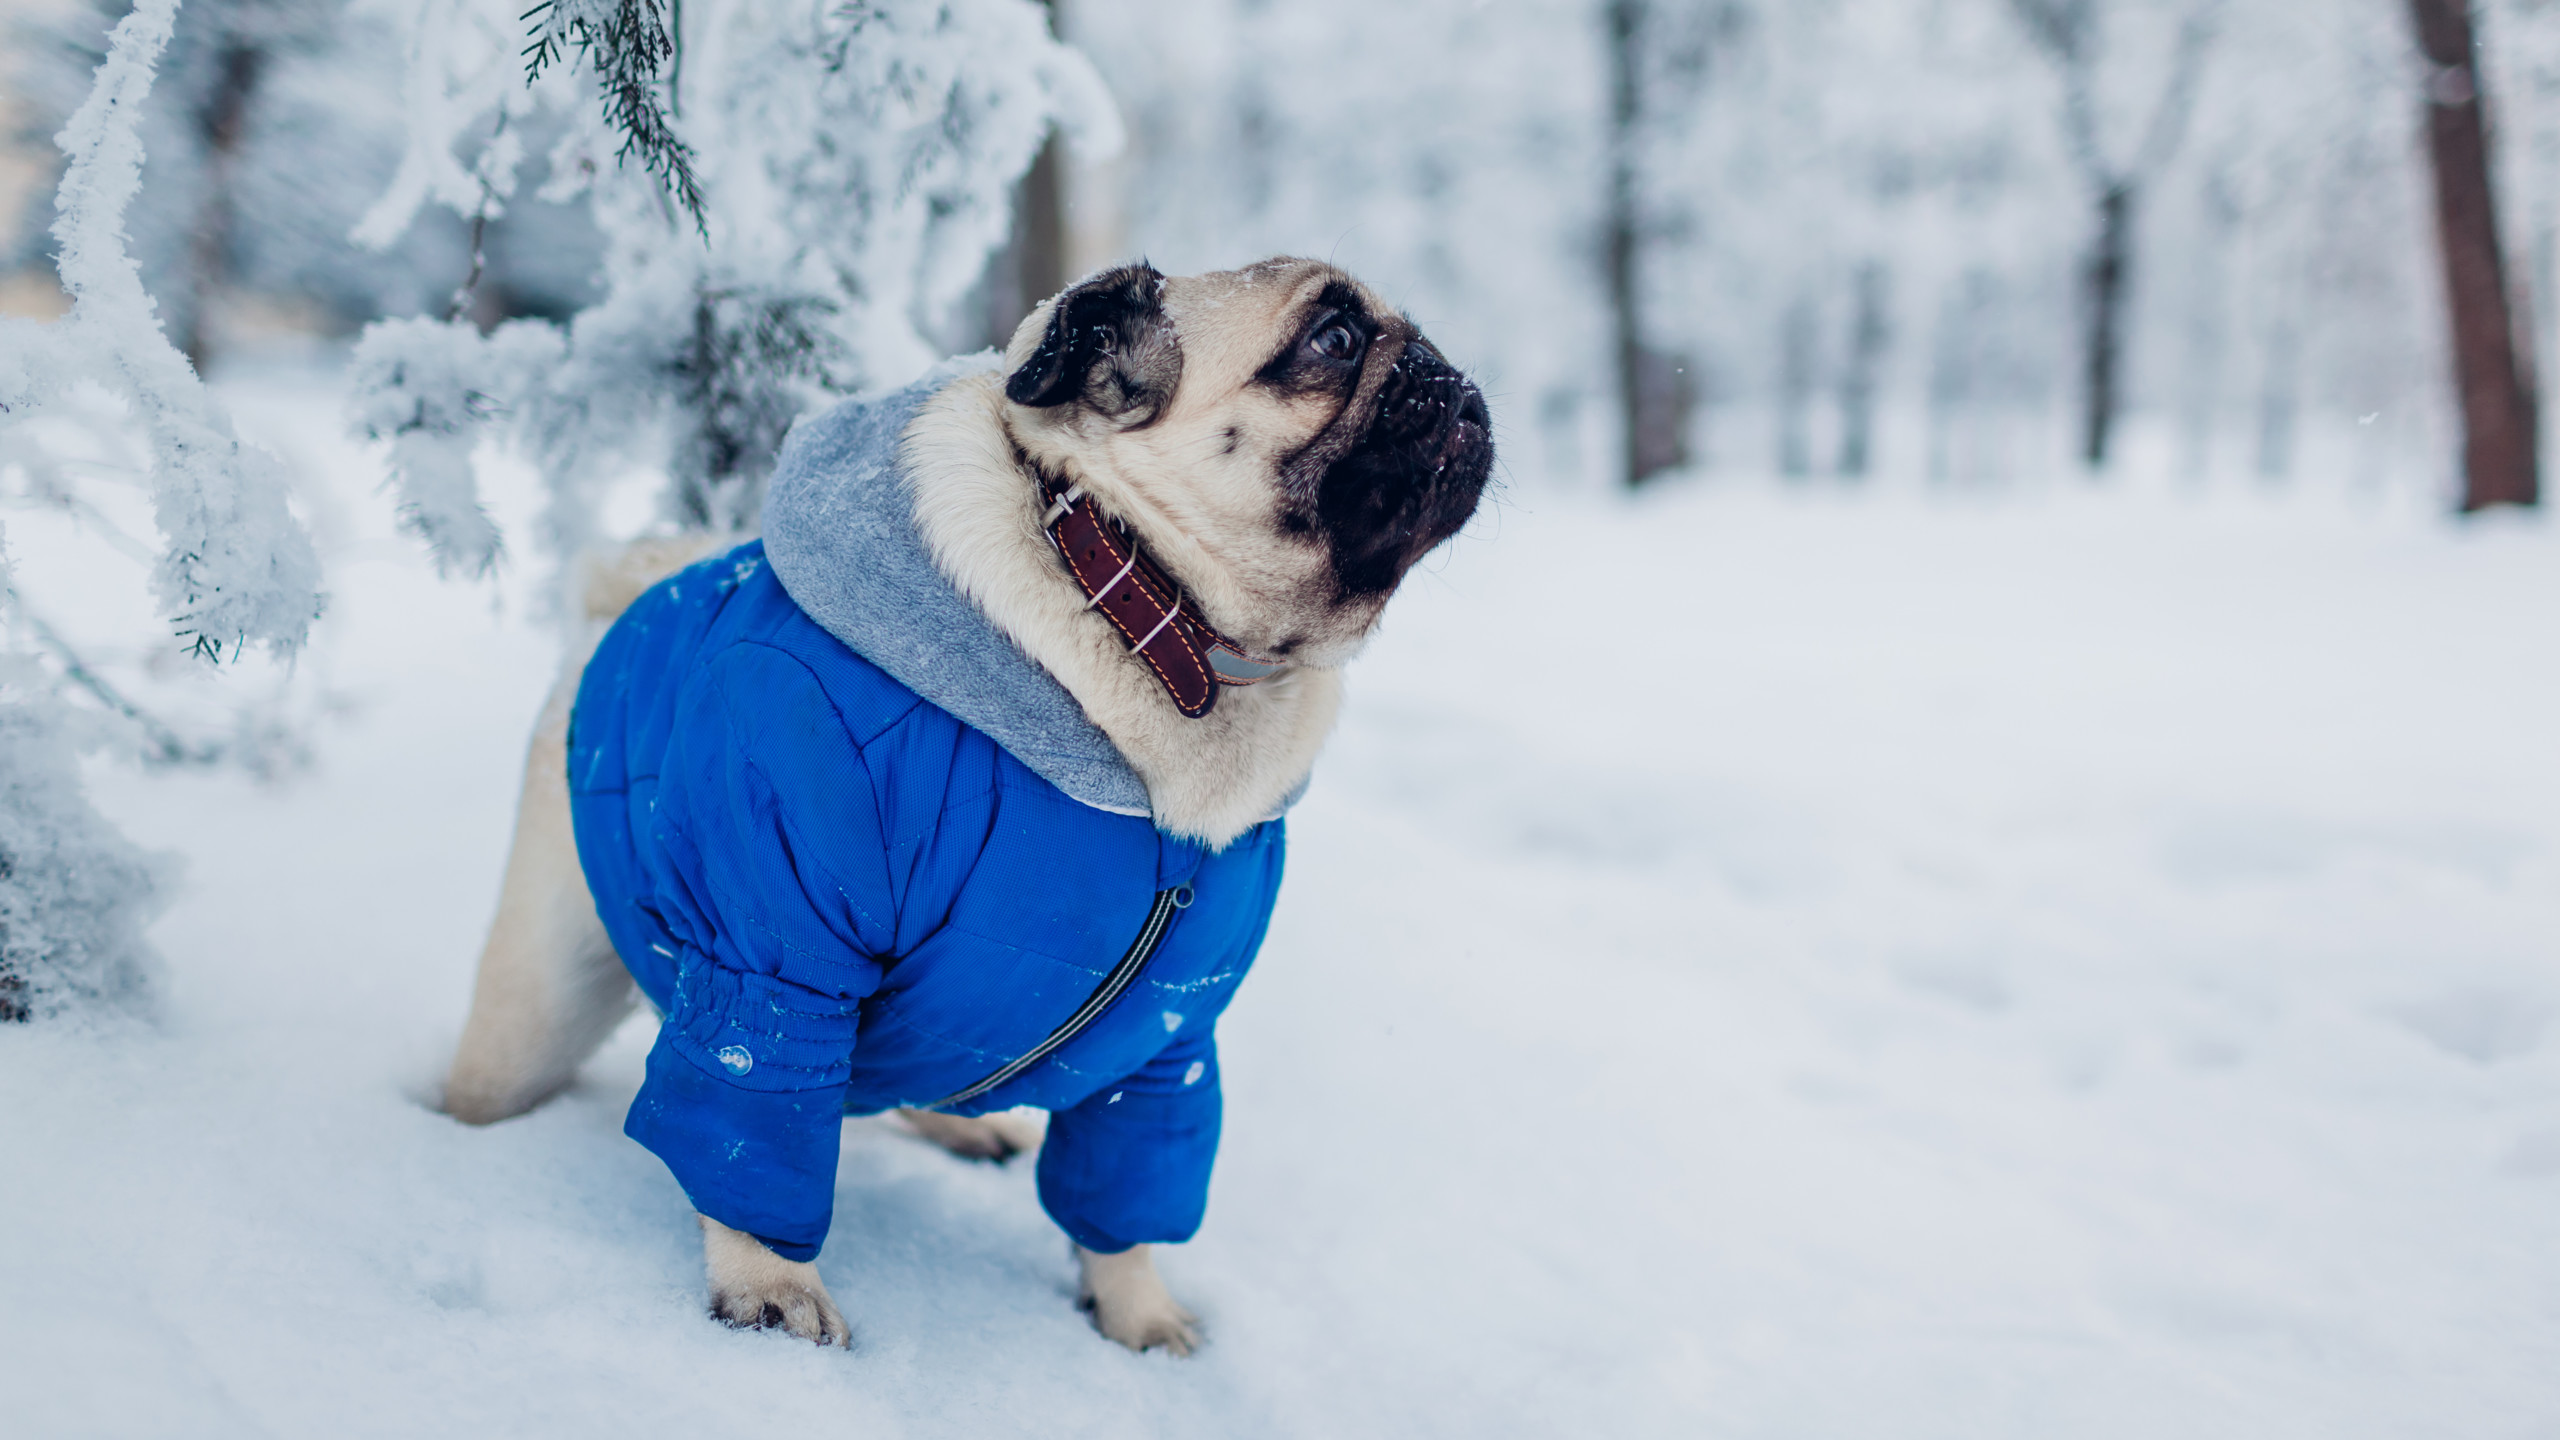 pug wearing blue jacket stand in snow covered forest